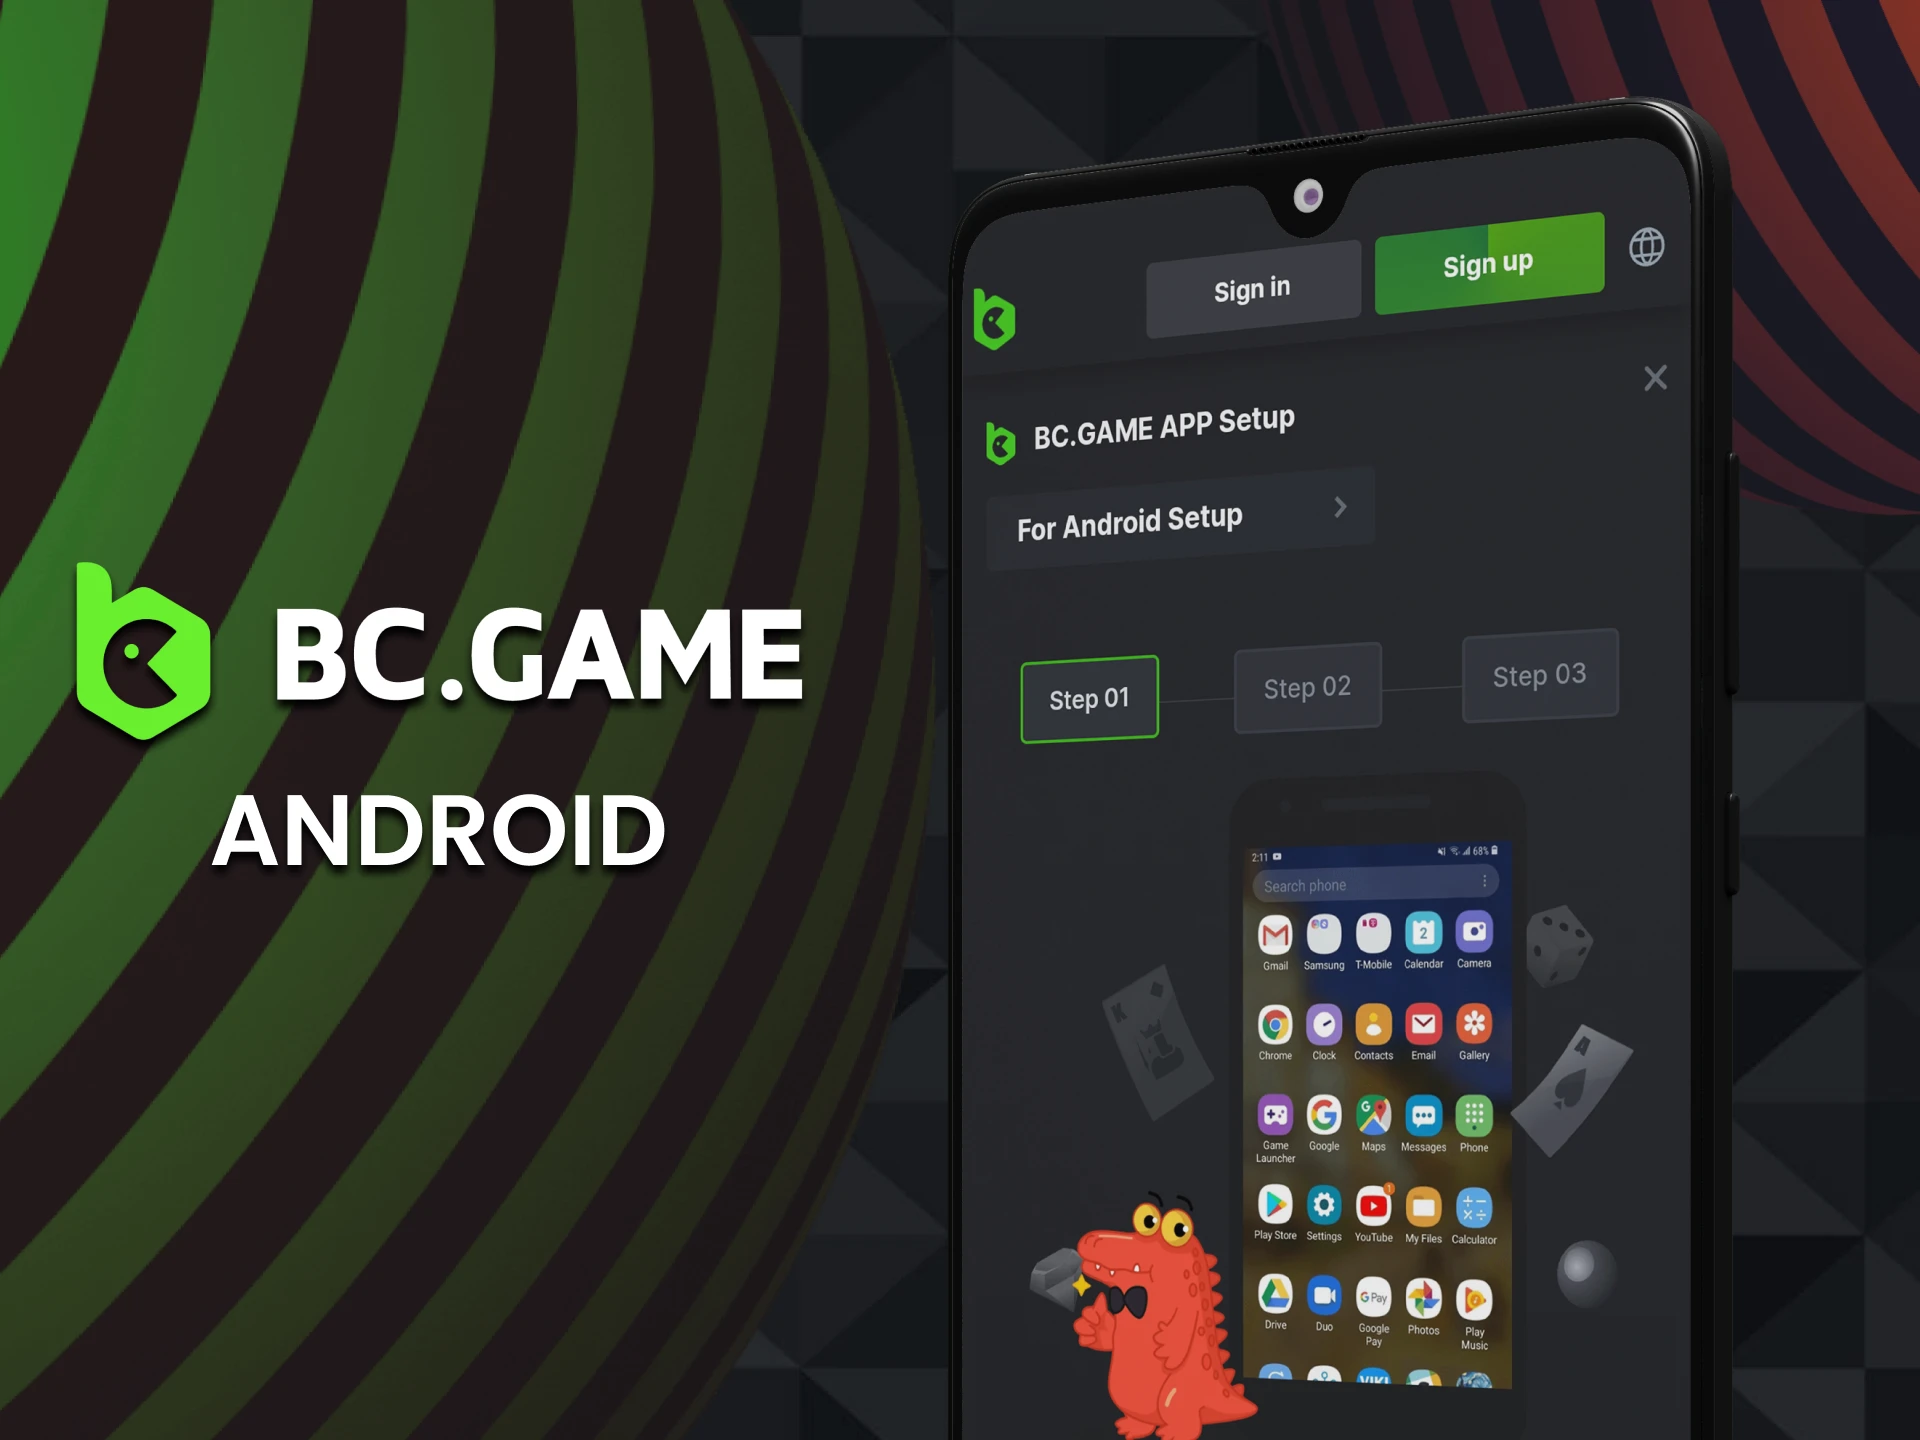 Download BC Game app on any Android device.